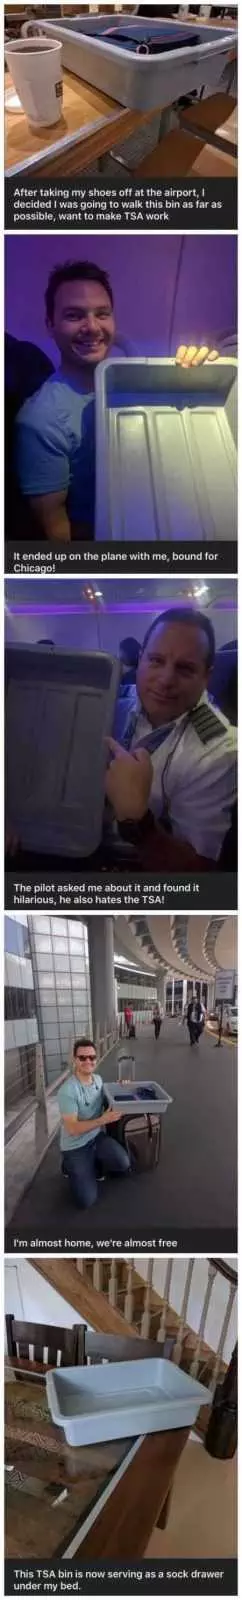 Series Of Funny Pictures Of A Pilot Trolling Tsa By Taking A Tray With Him From Security, Onto A Flight And All The Way Home.